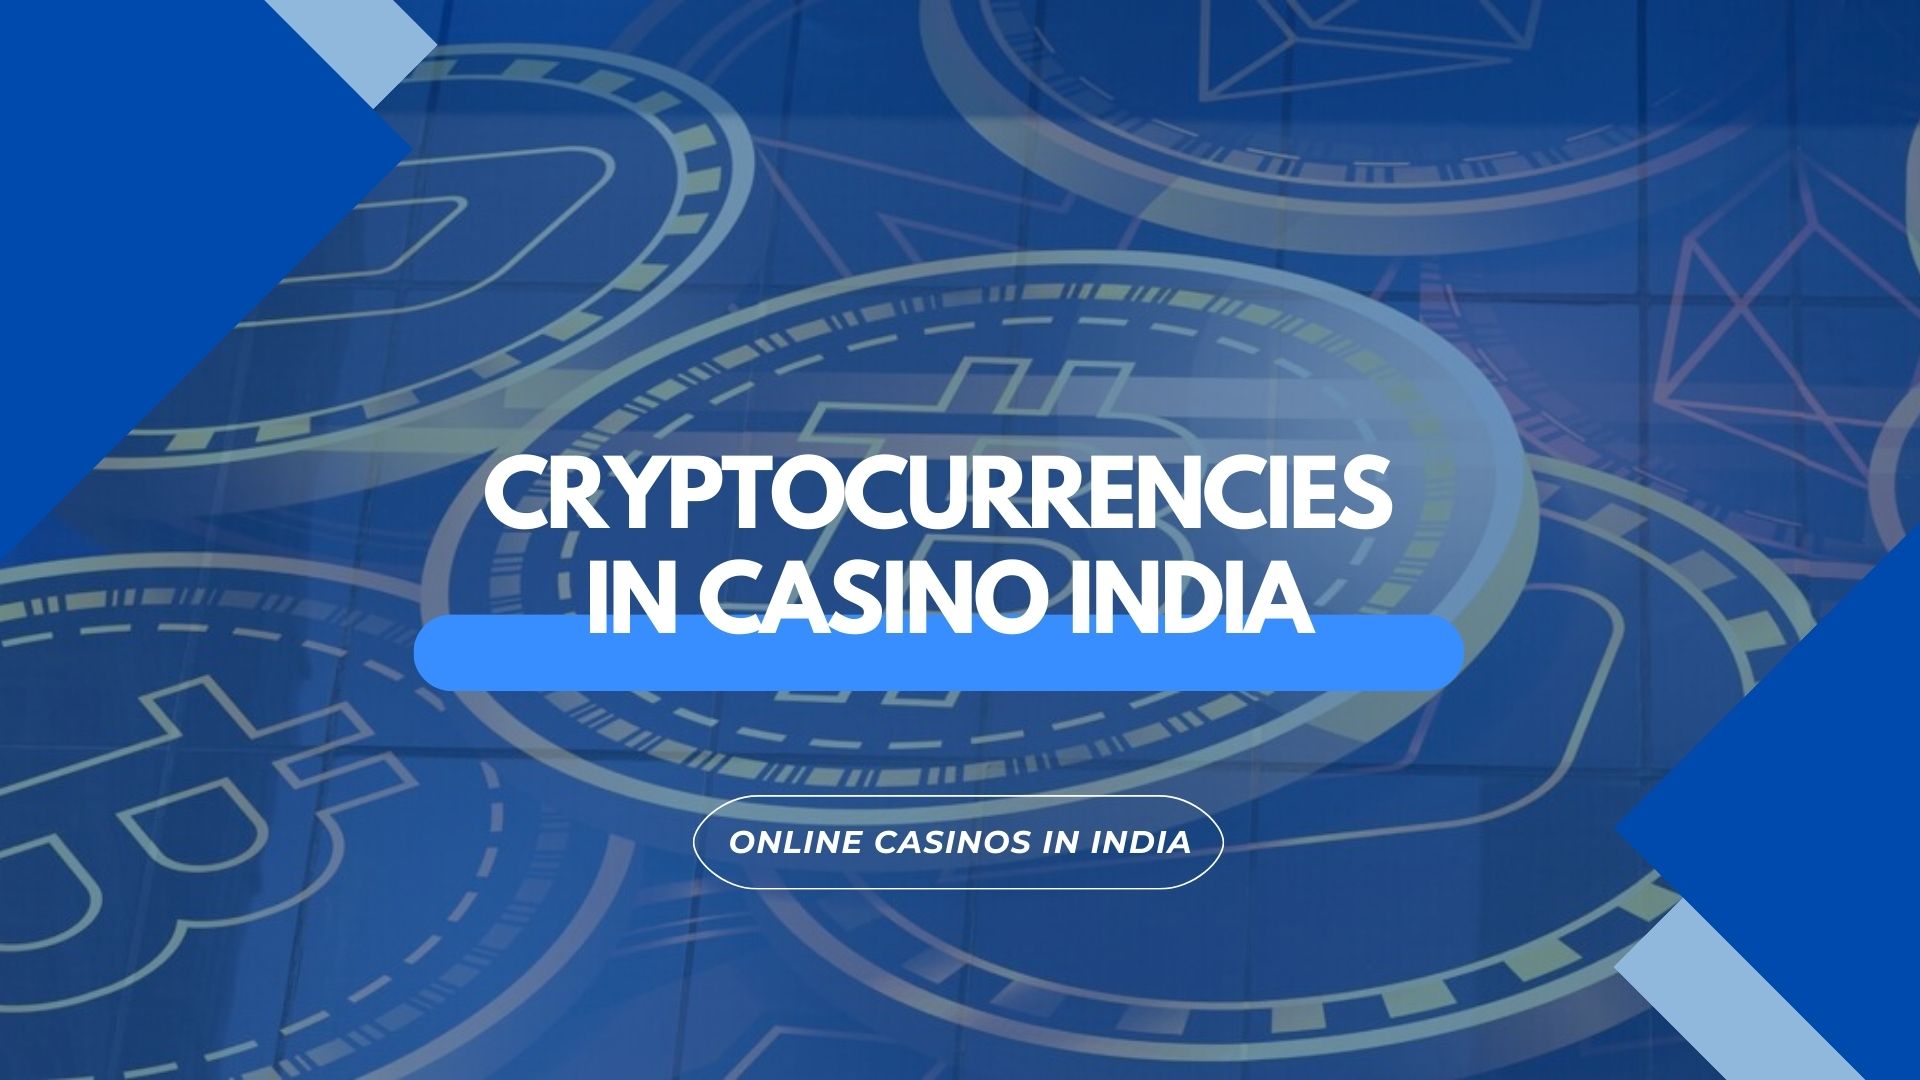 Cryptocurrencies See Increased Accessibility for Indian Gamblers